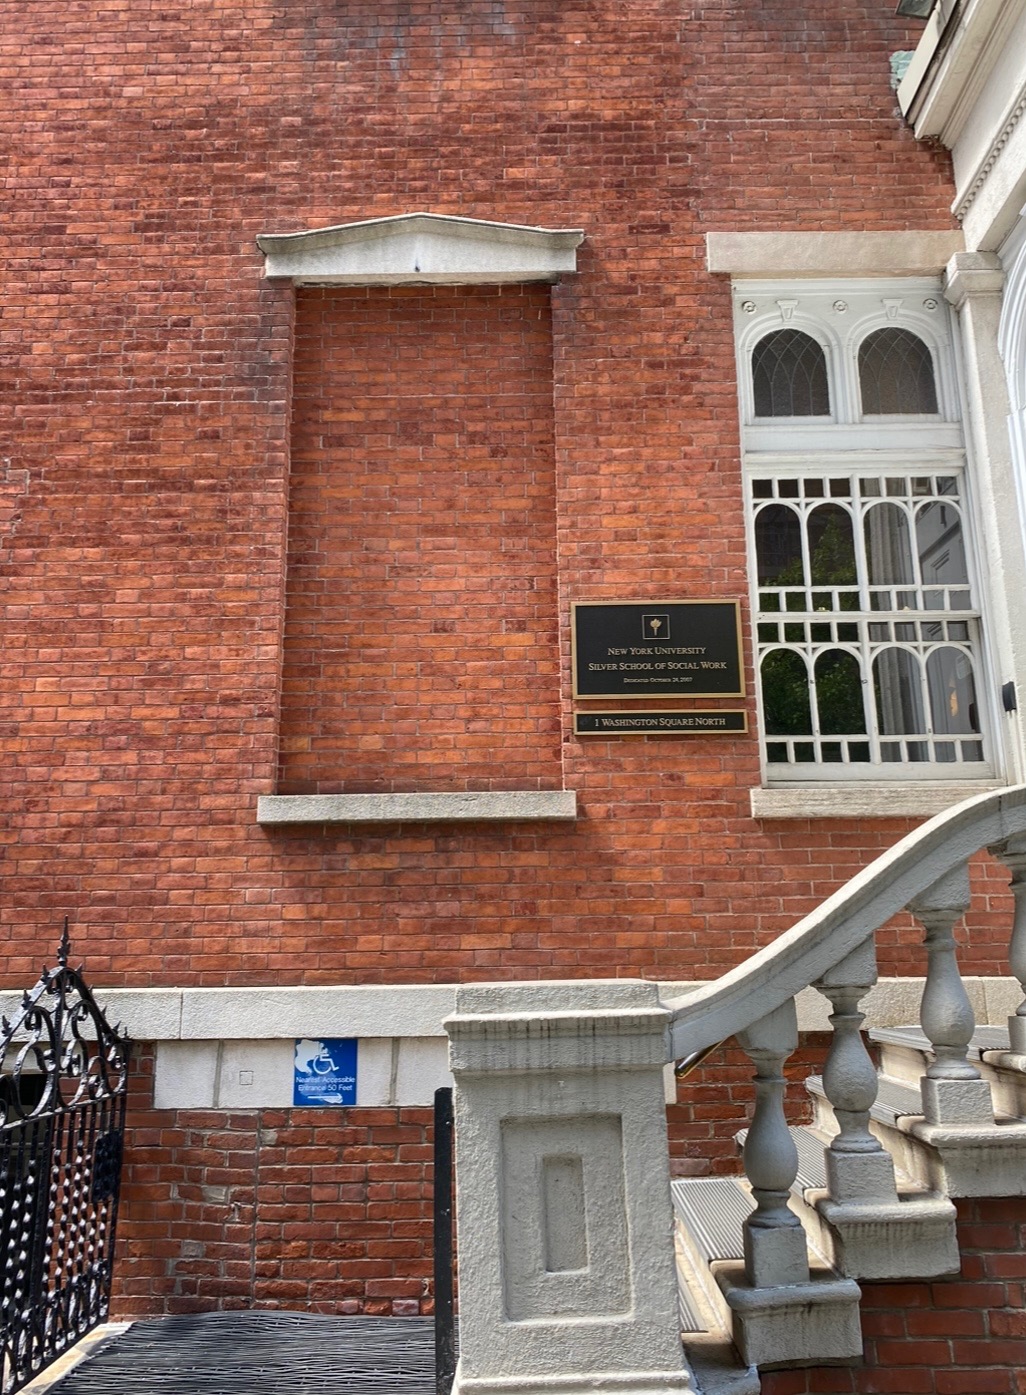 A brick building with stairs in front of it.